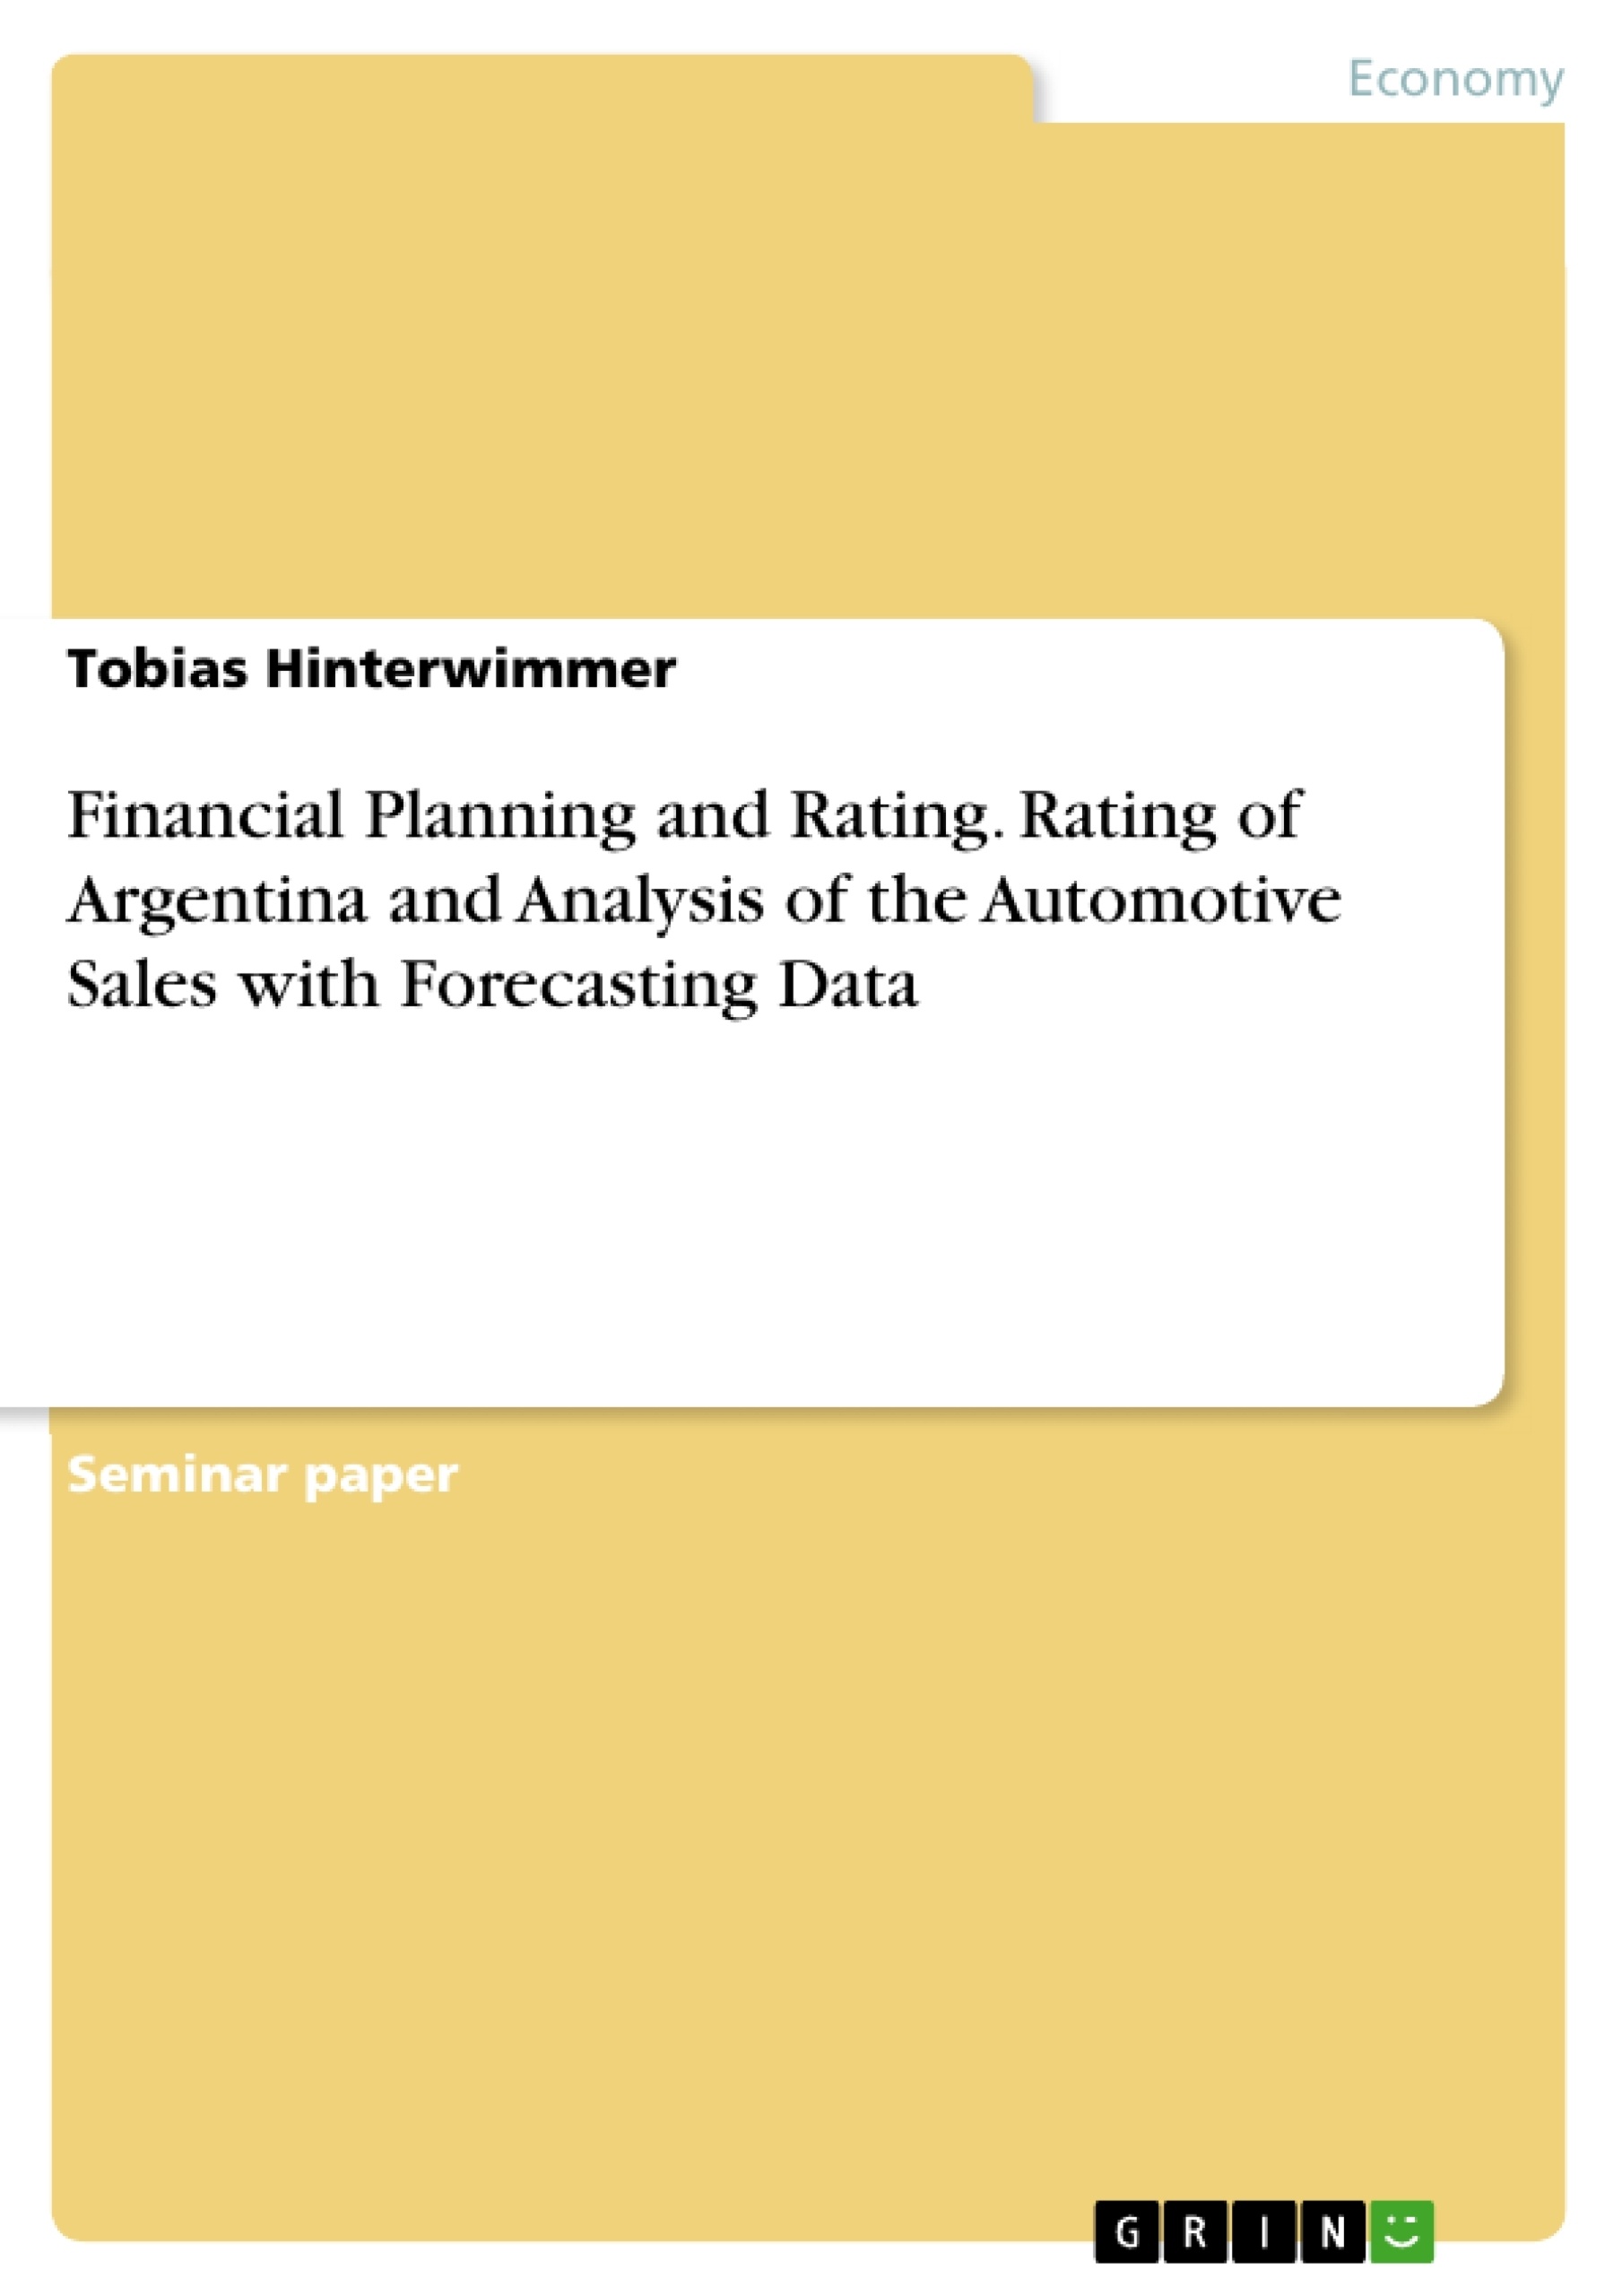 Title: Financial Planning and Rating. Rating of Argentina and Analysis of the Automotive Sales with Forecasting Data